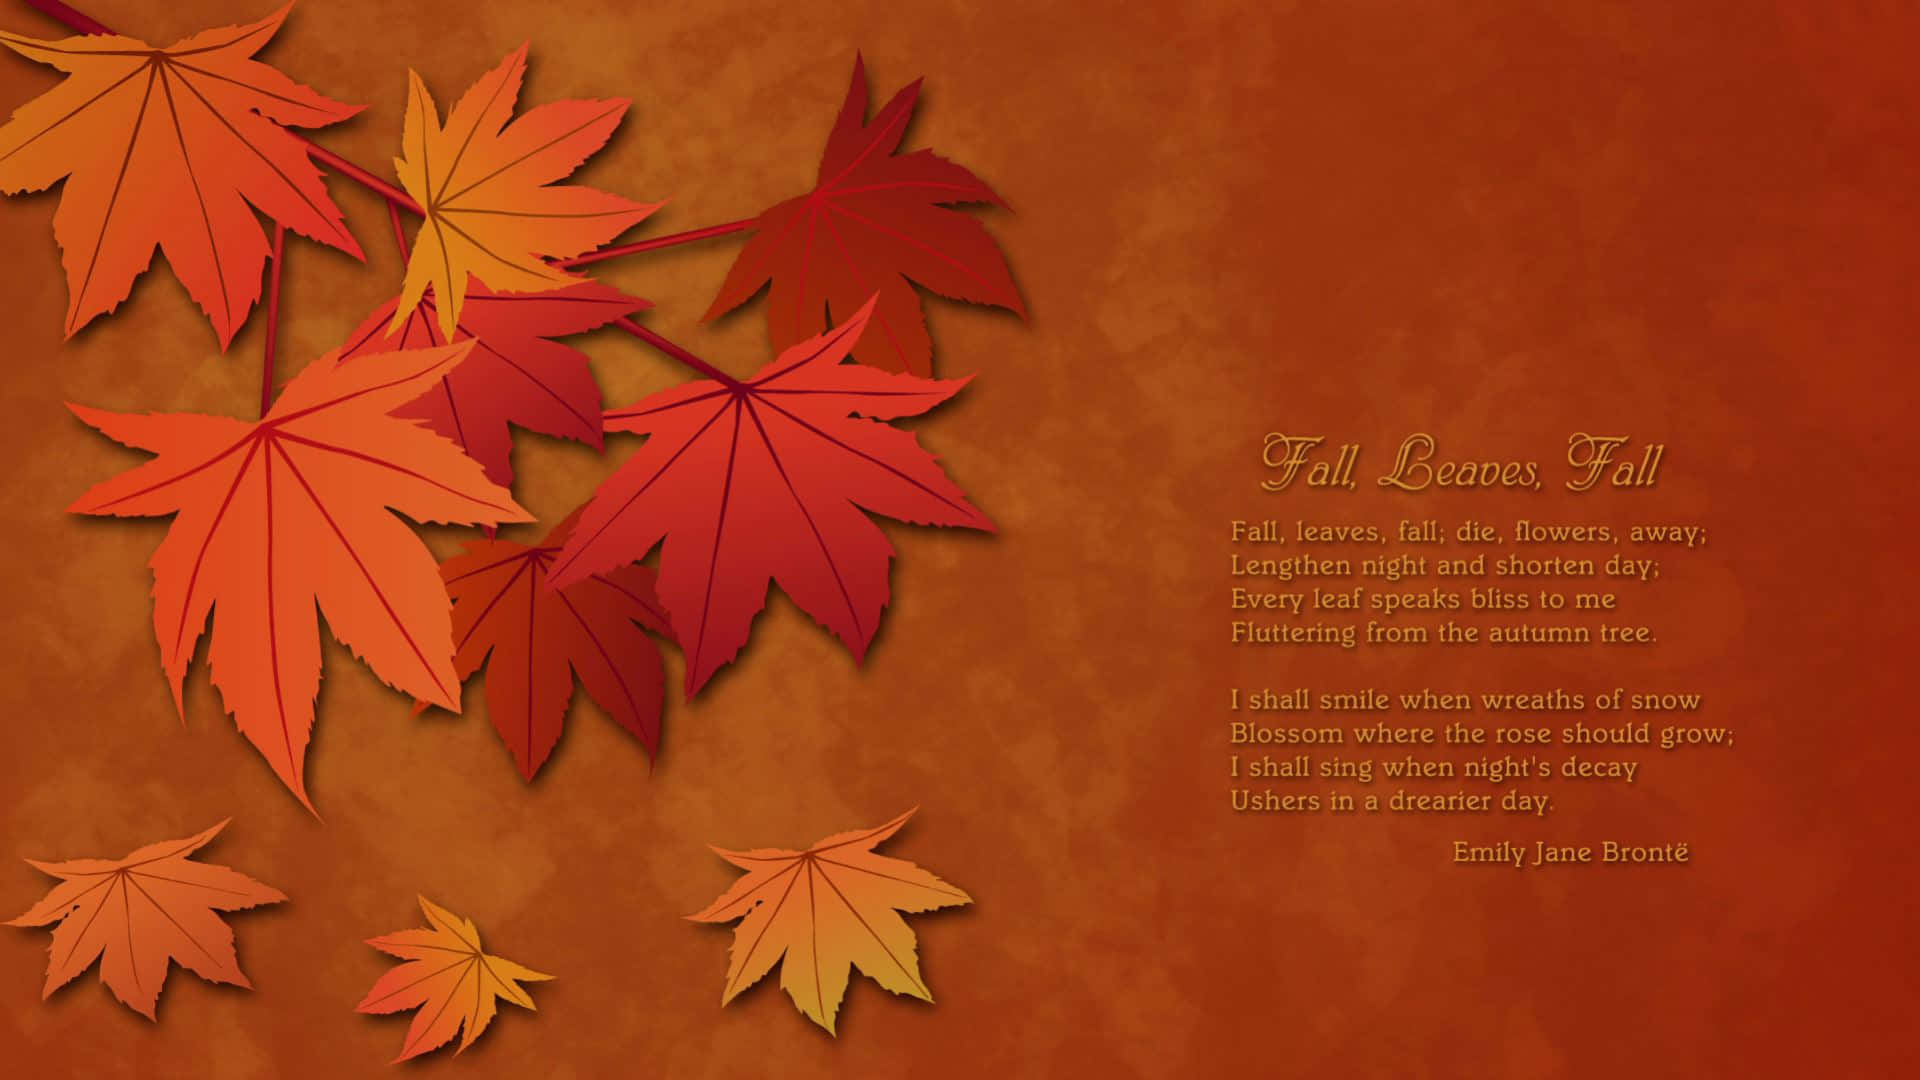 Explore the beauty of autumn with Simple Autumn Wallpaper